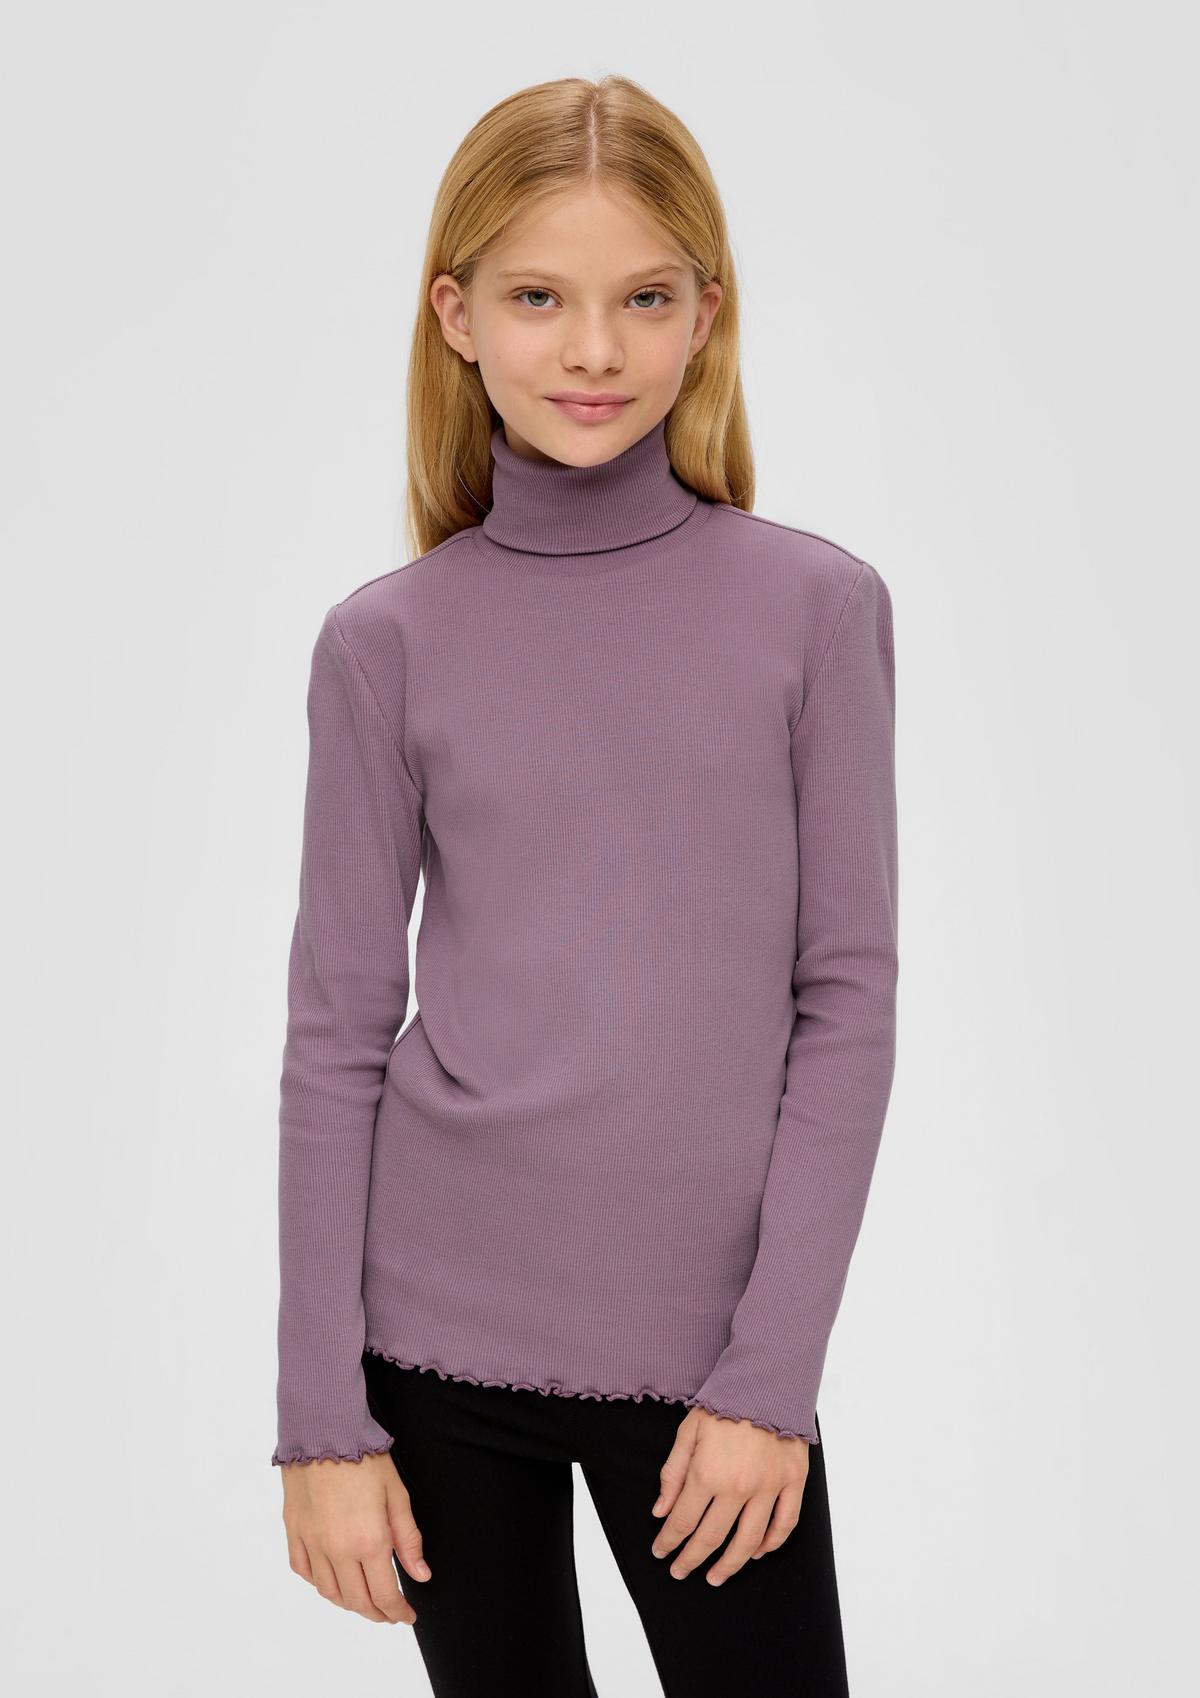 s.Oliver Polo neck jumper with a ribbed texture